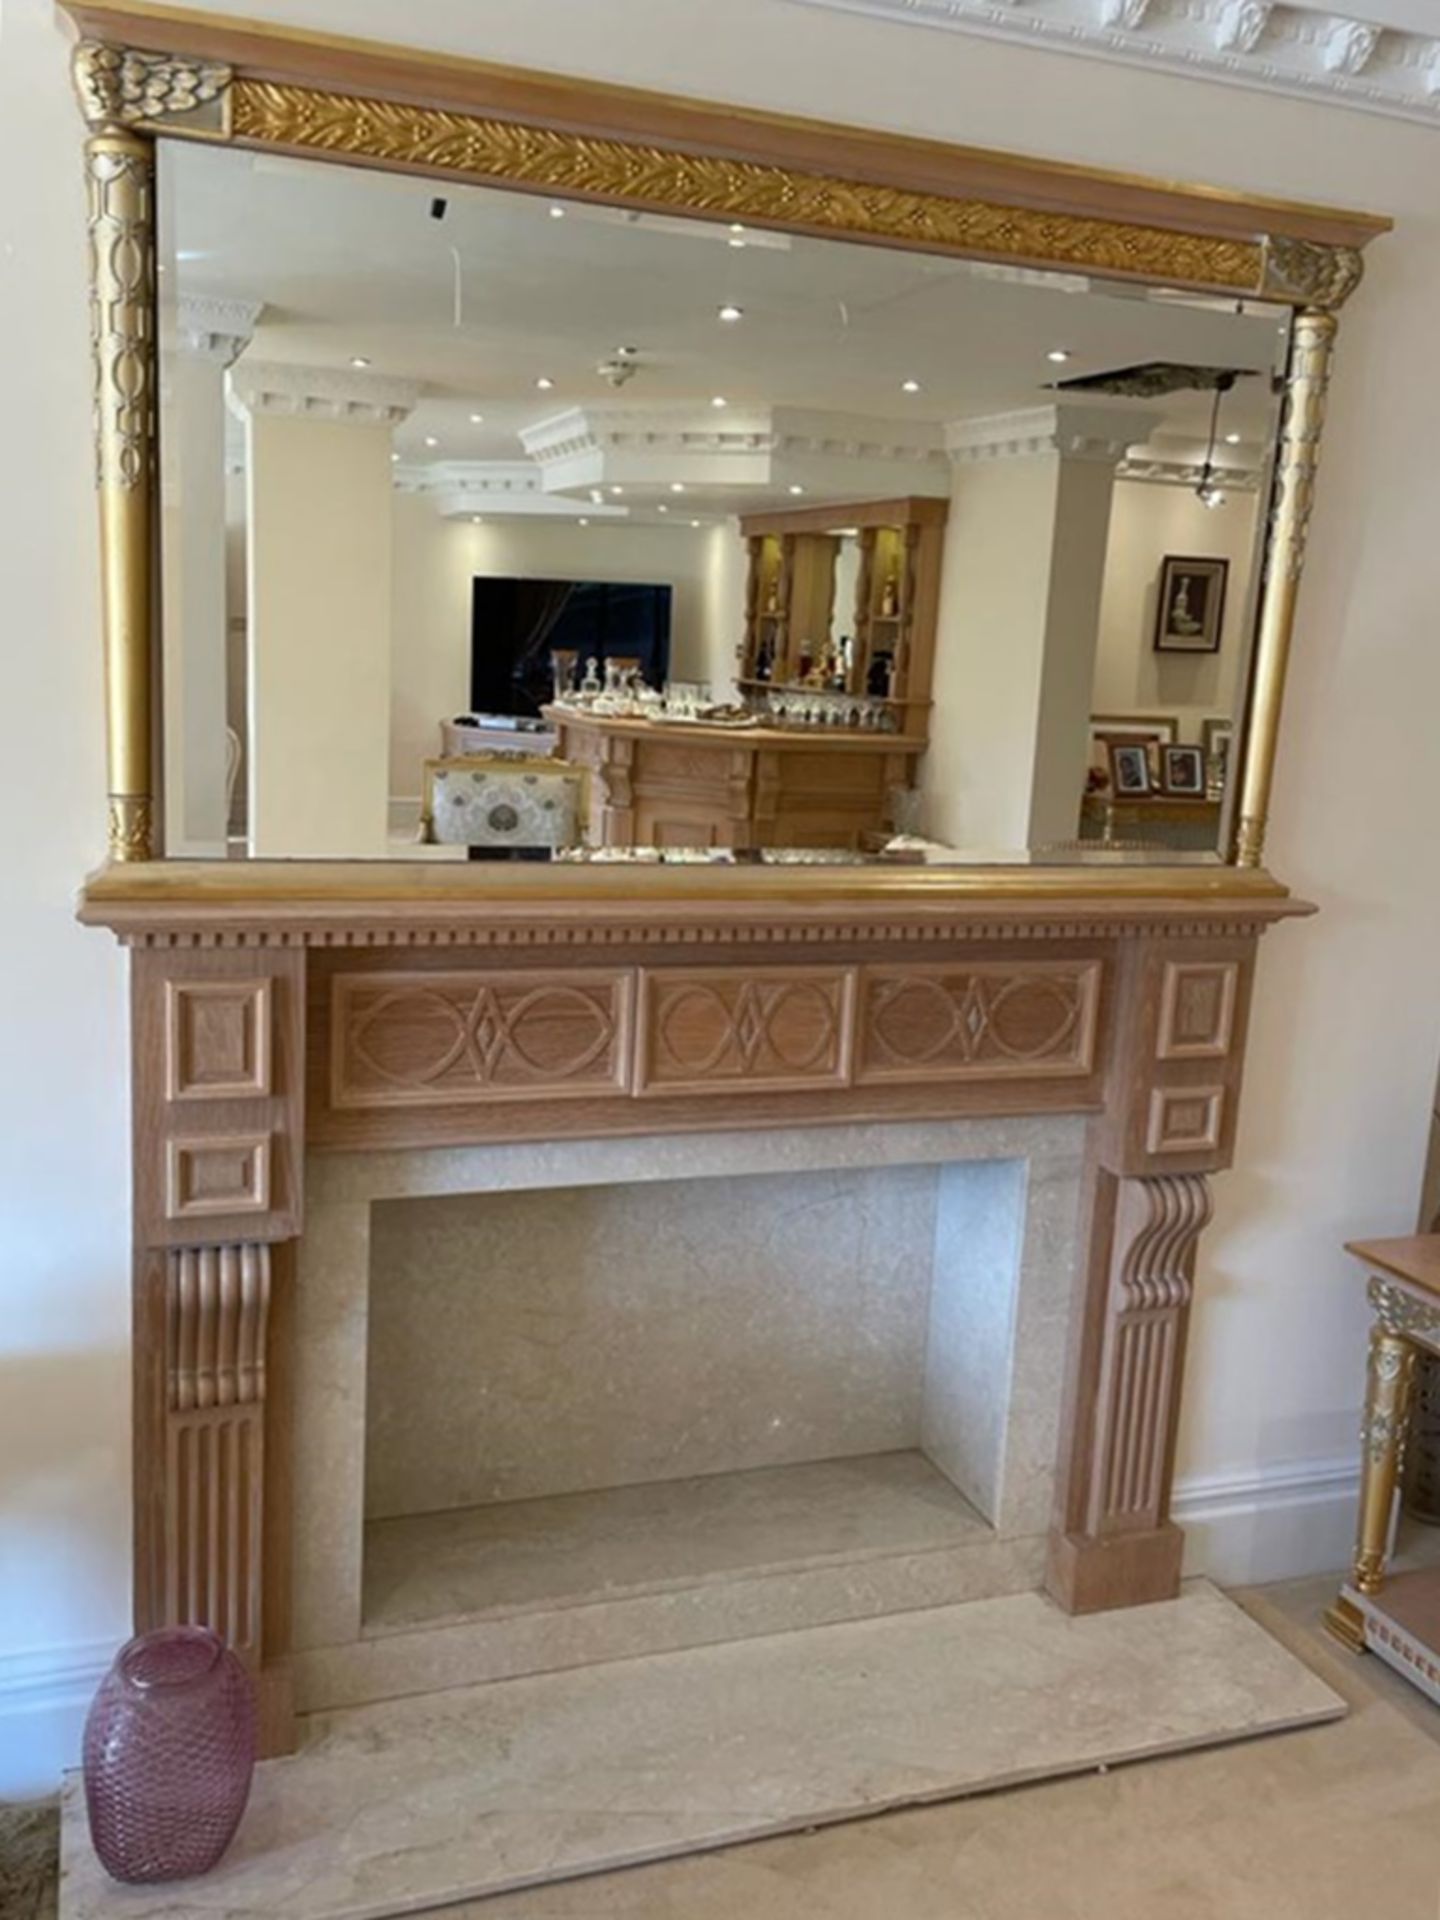 1 x Ornate Overmantel Wall Mirror With Fine Carving Work and Moulded Cornice - Features a Bevelled - Image 6 of 9